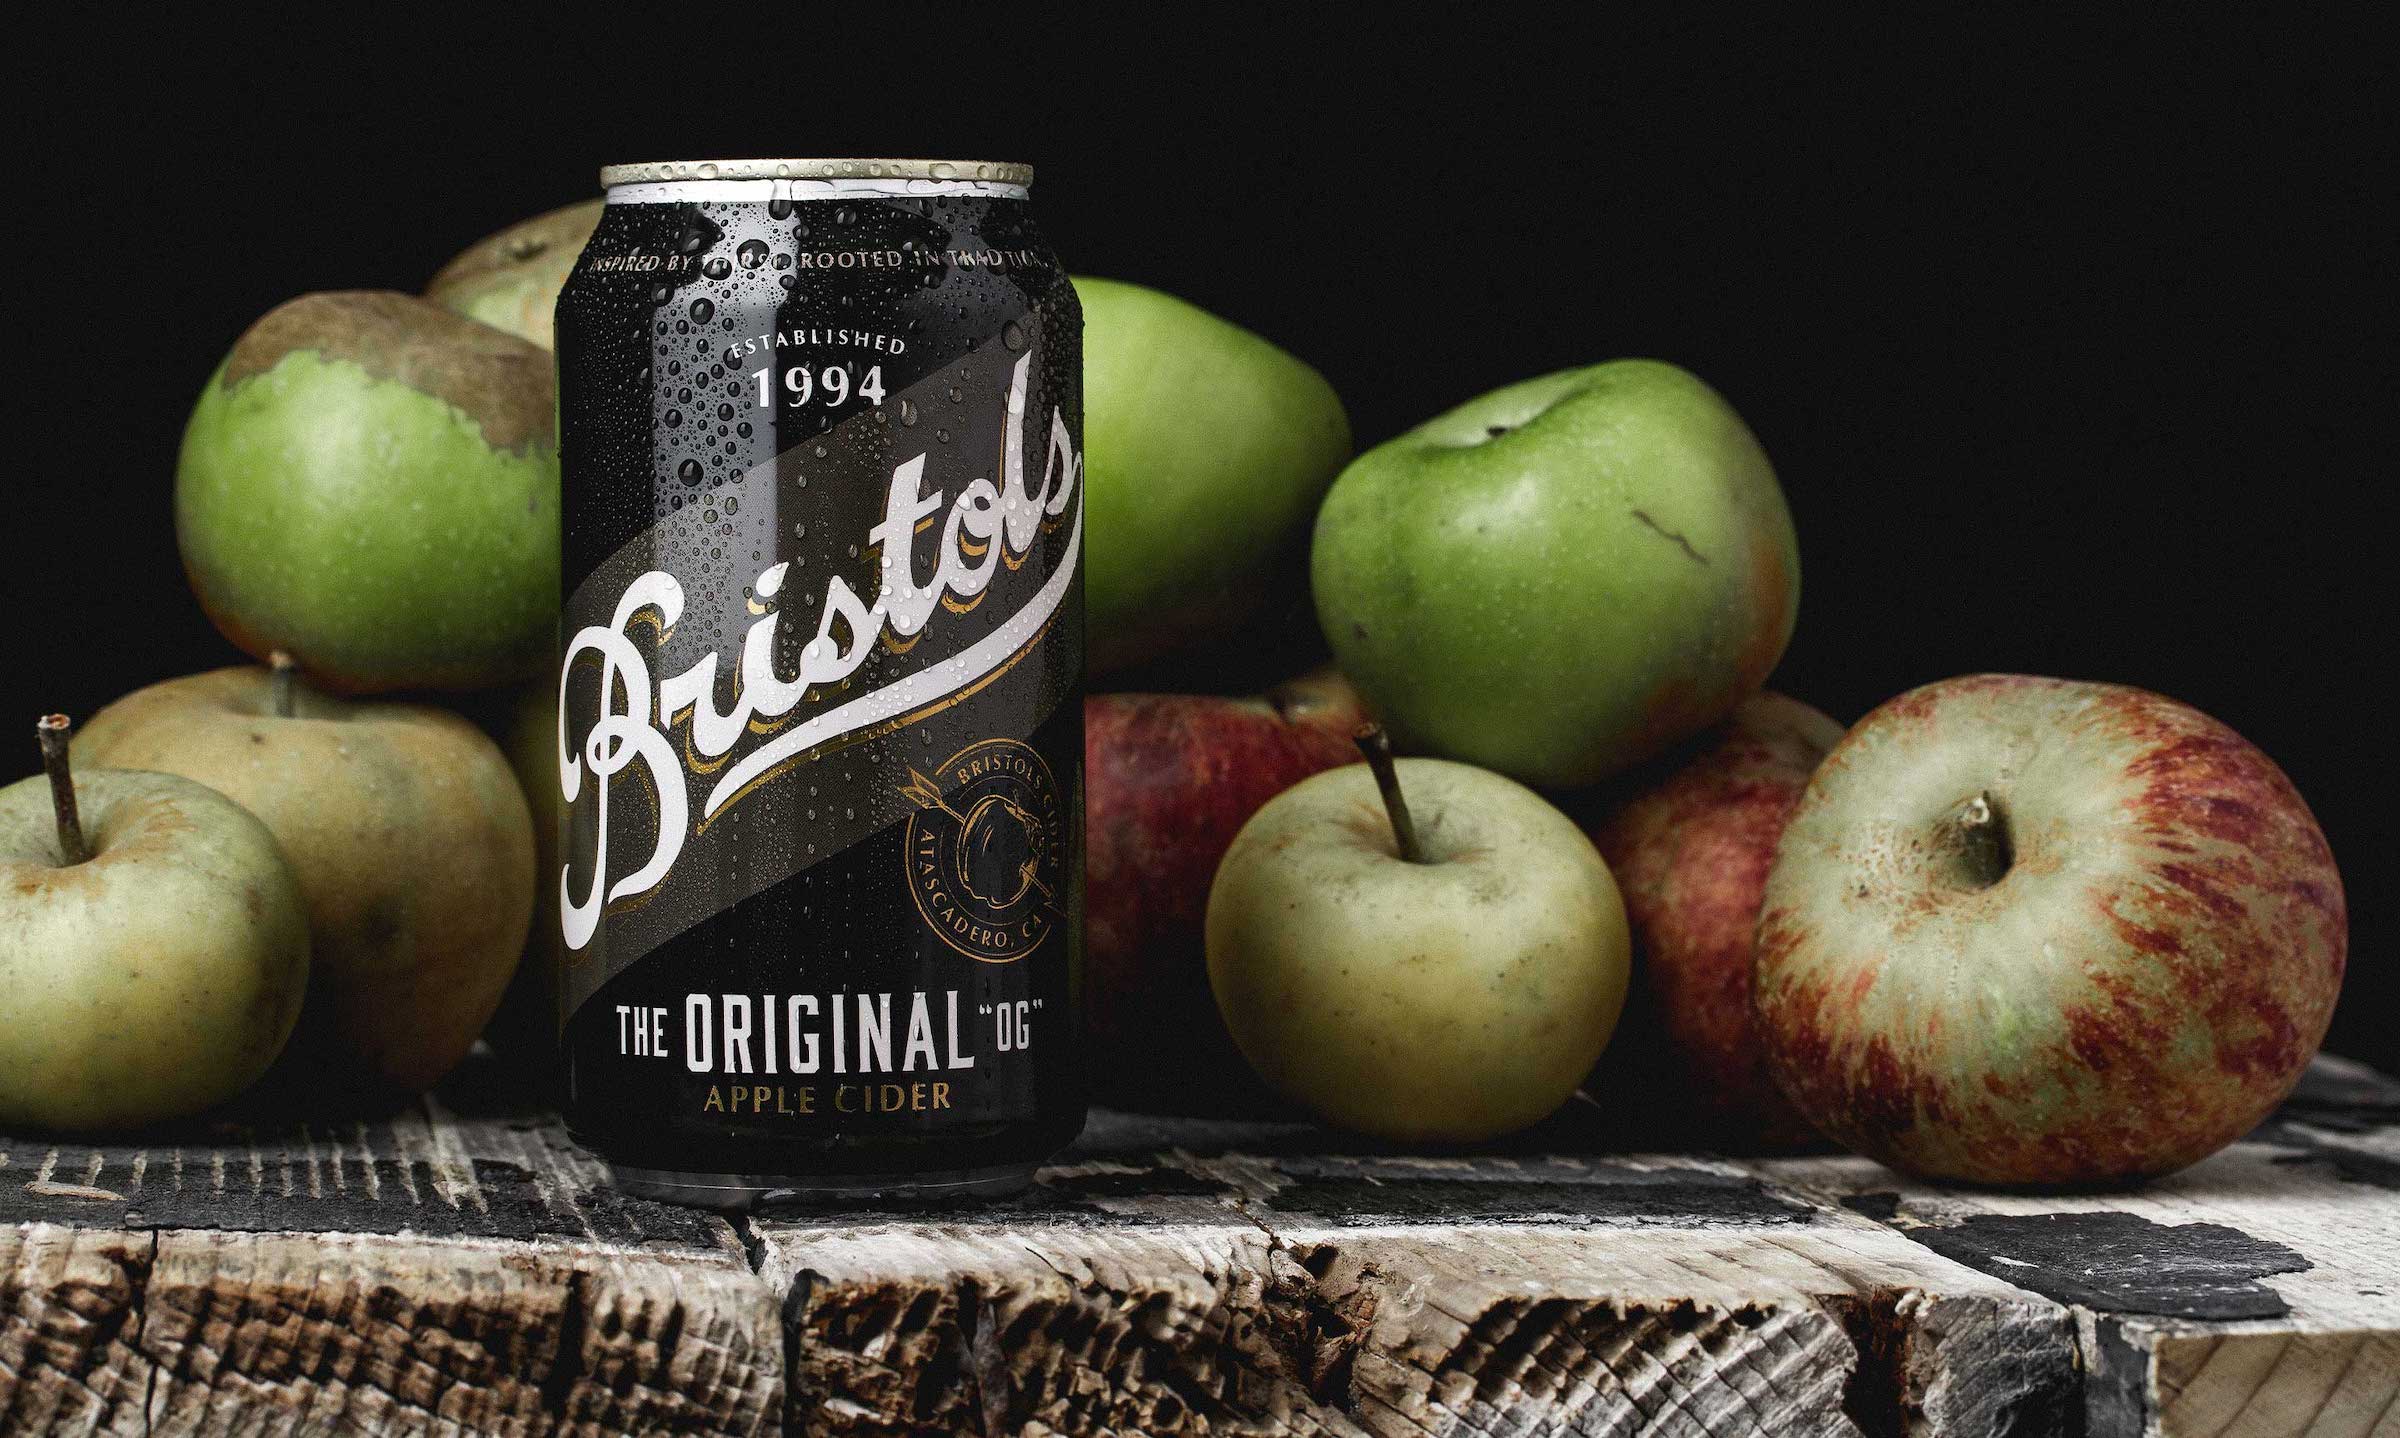 Bristols Cider: Inspired by Thirst. Rooted in Tradition.